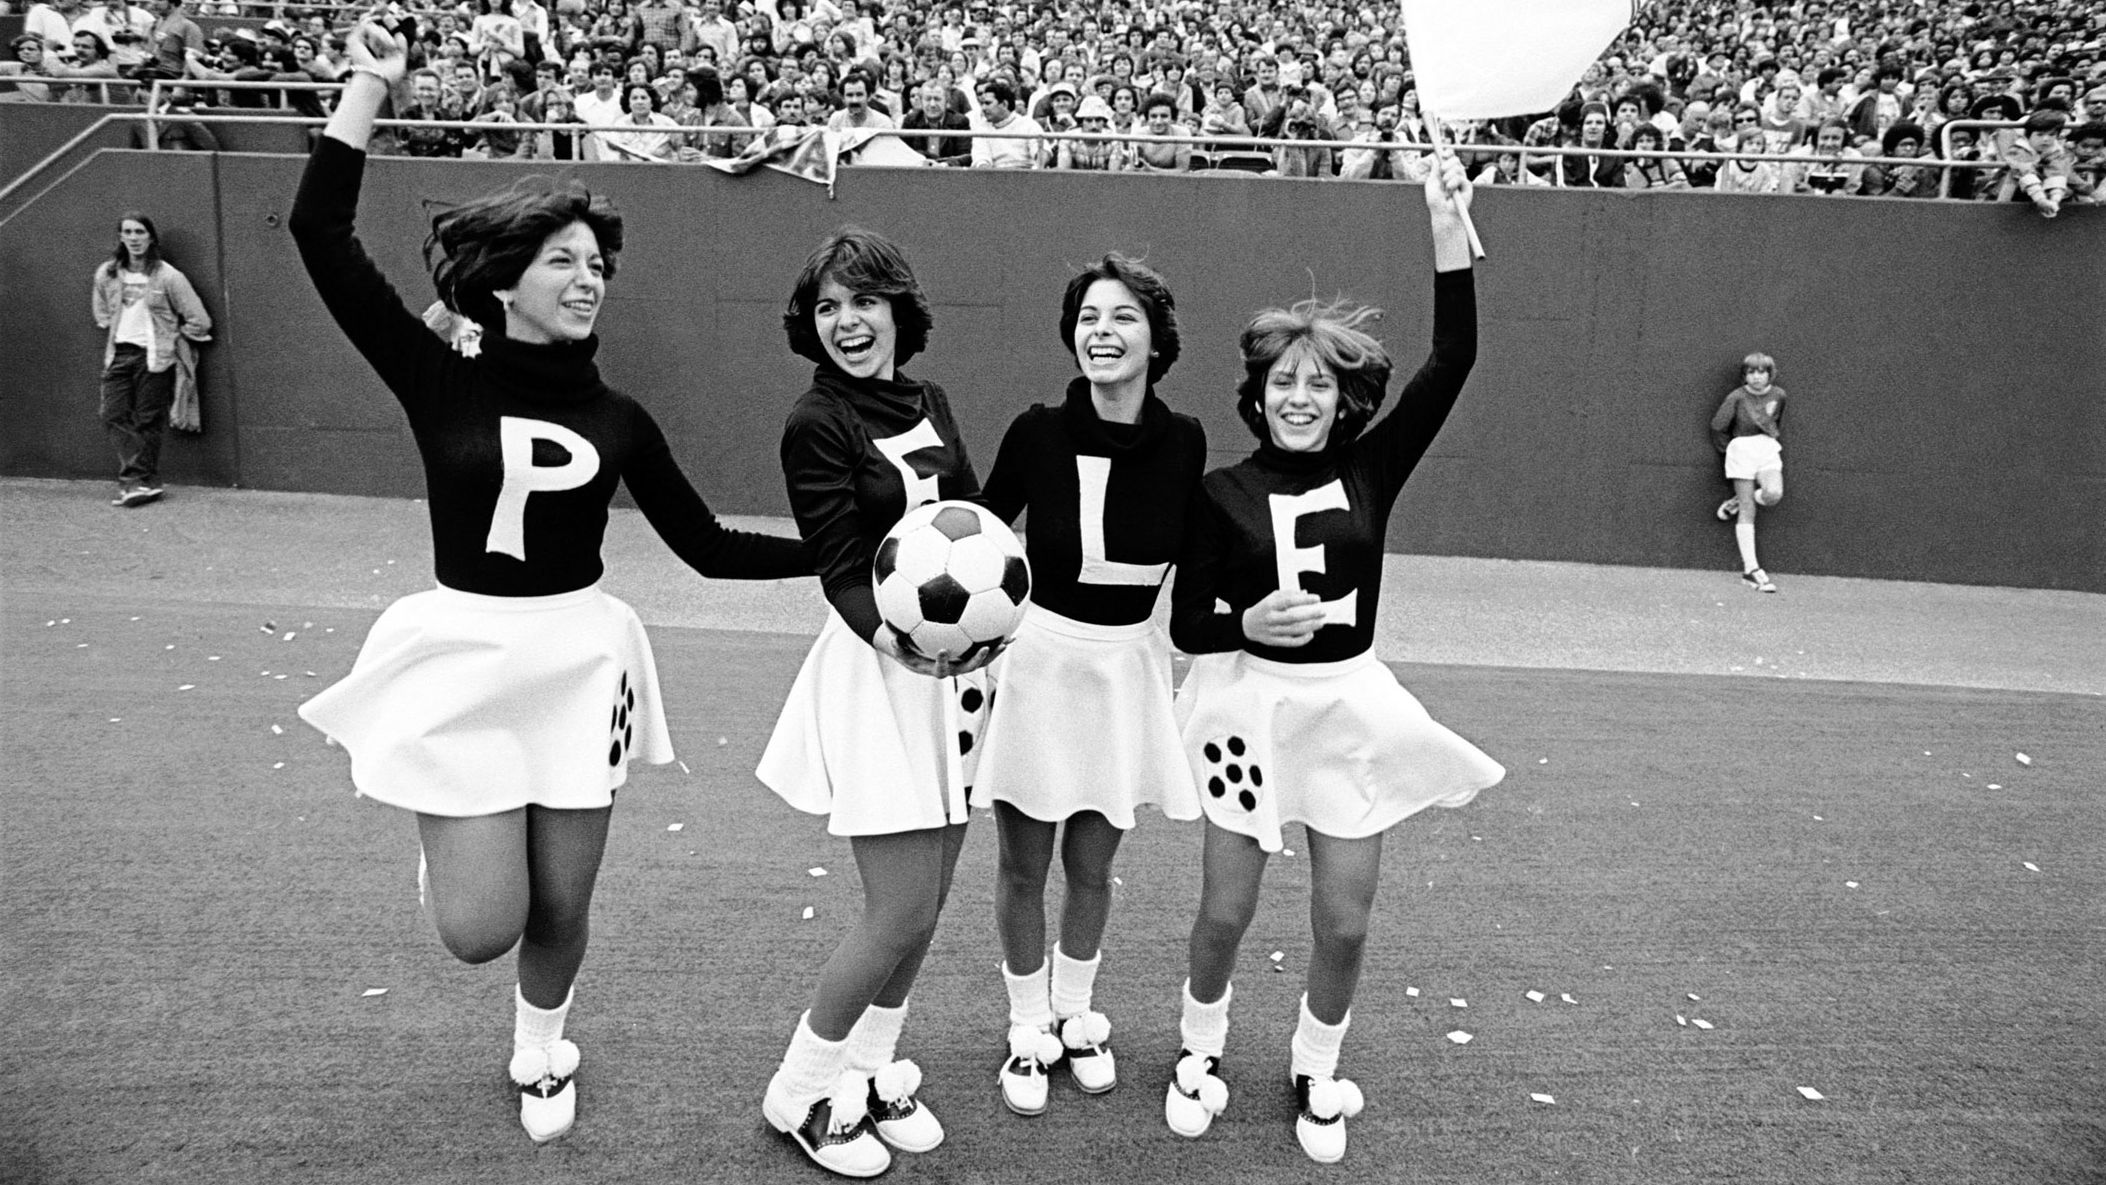 Cheerleaders wait to welcome Pelé onto the field during a Cosmos match in 1977.